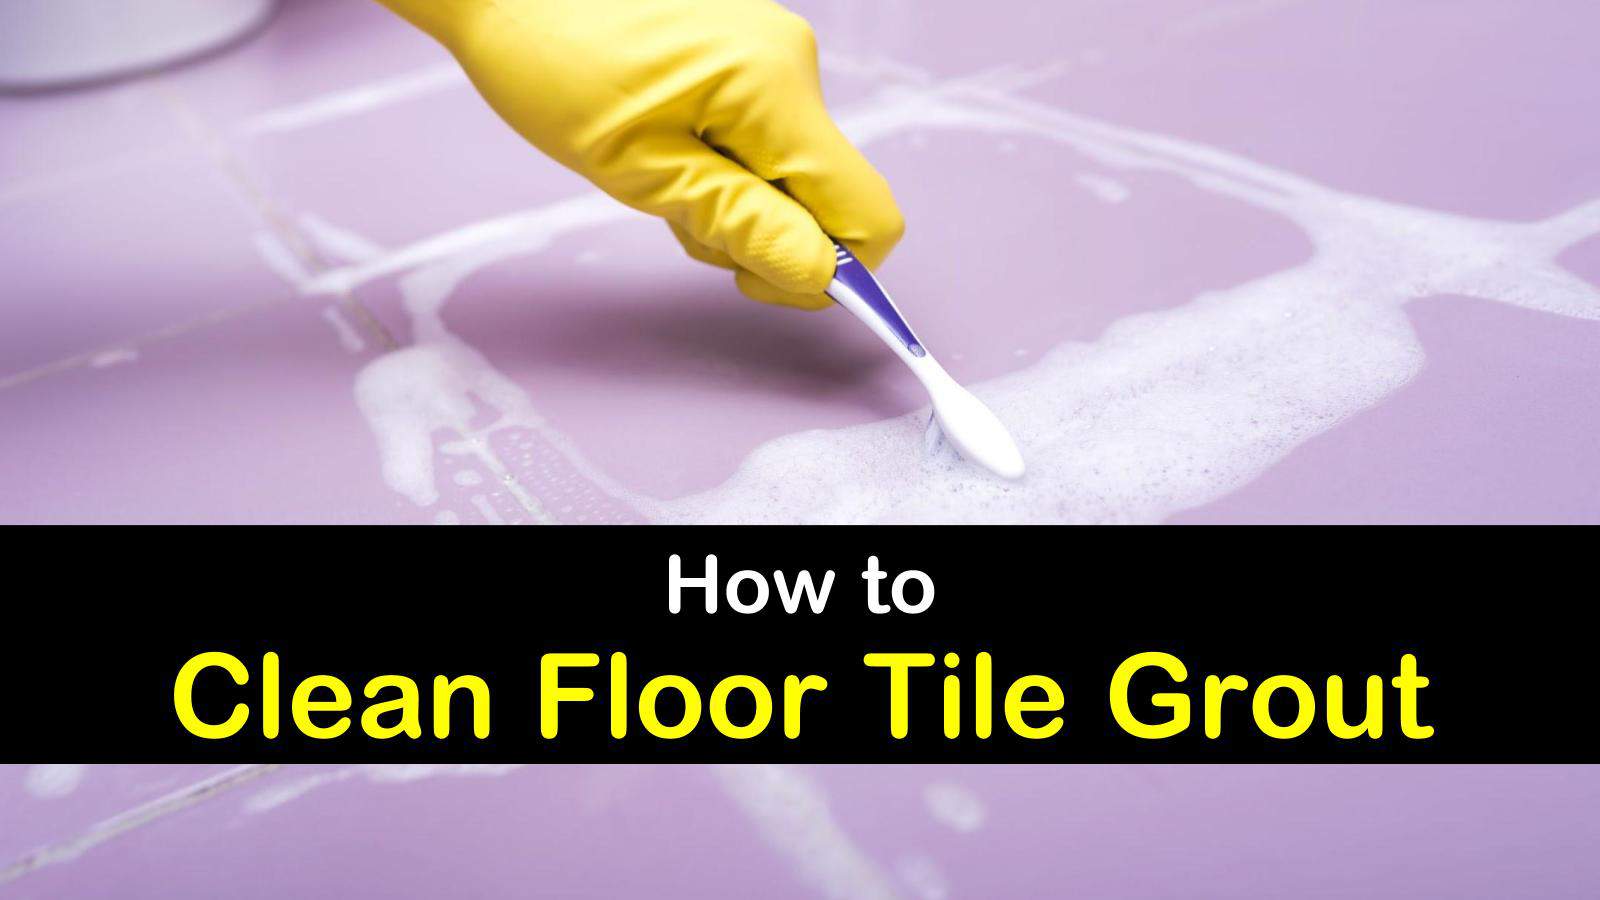 how to clean floor tile grout titleimg1